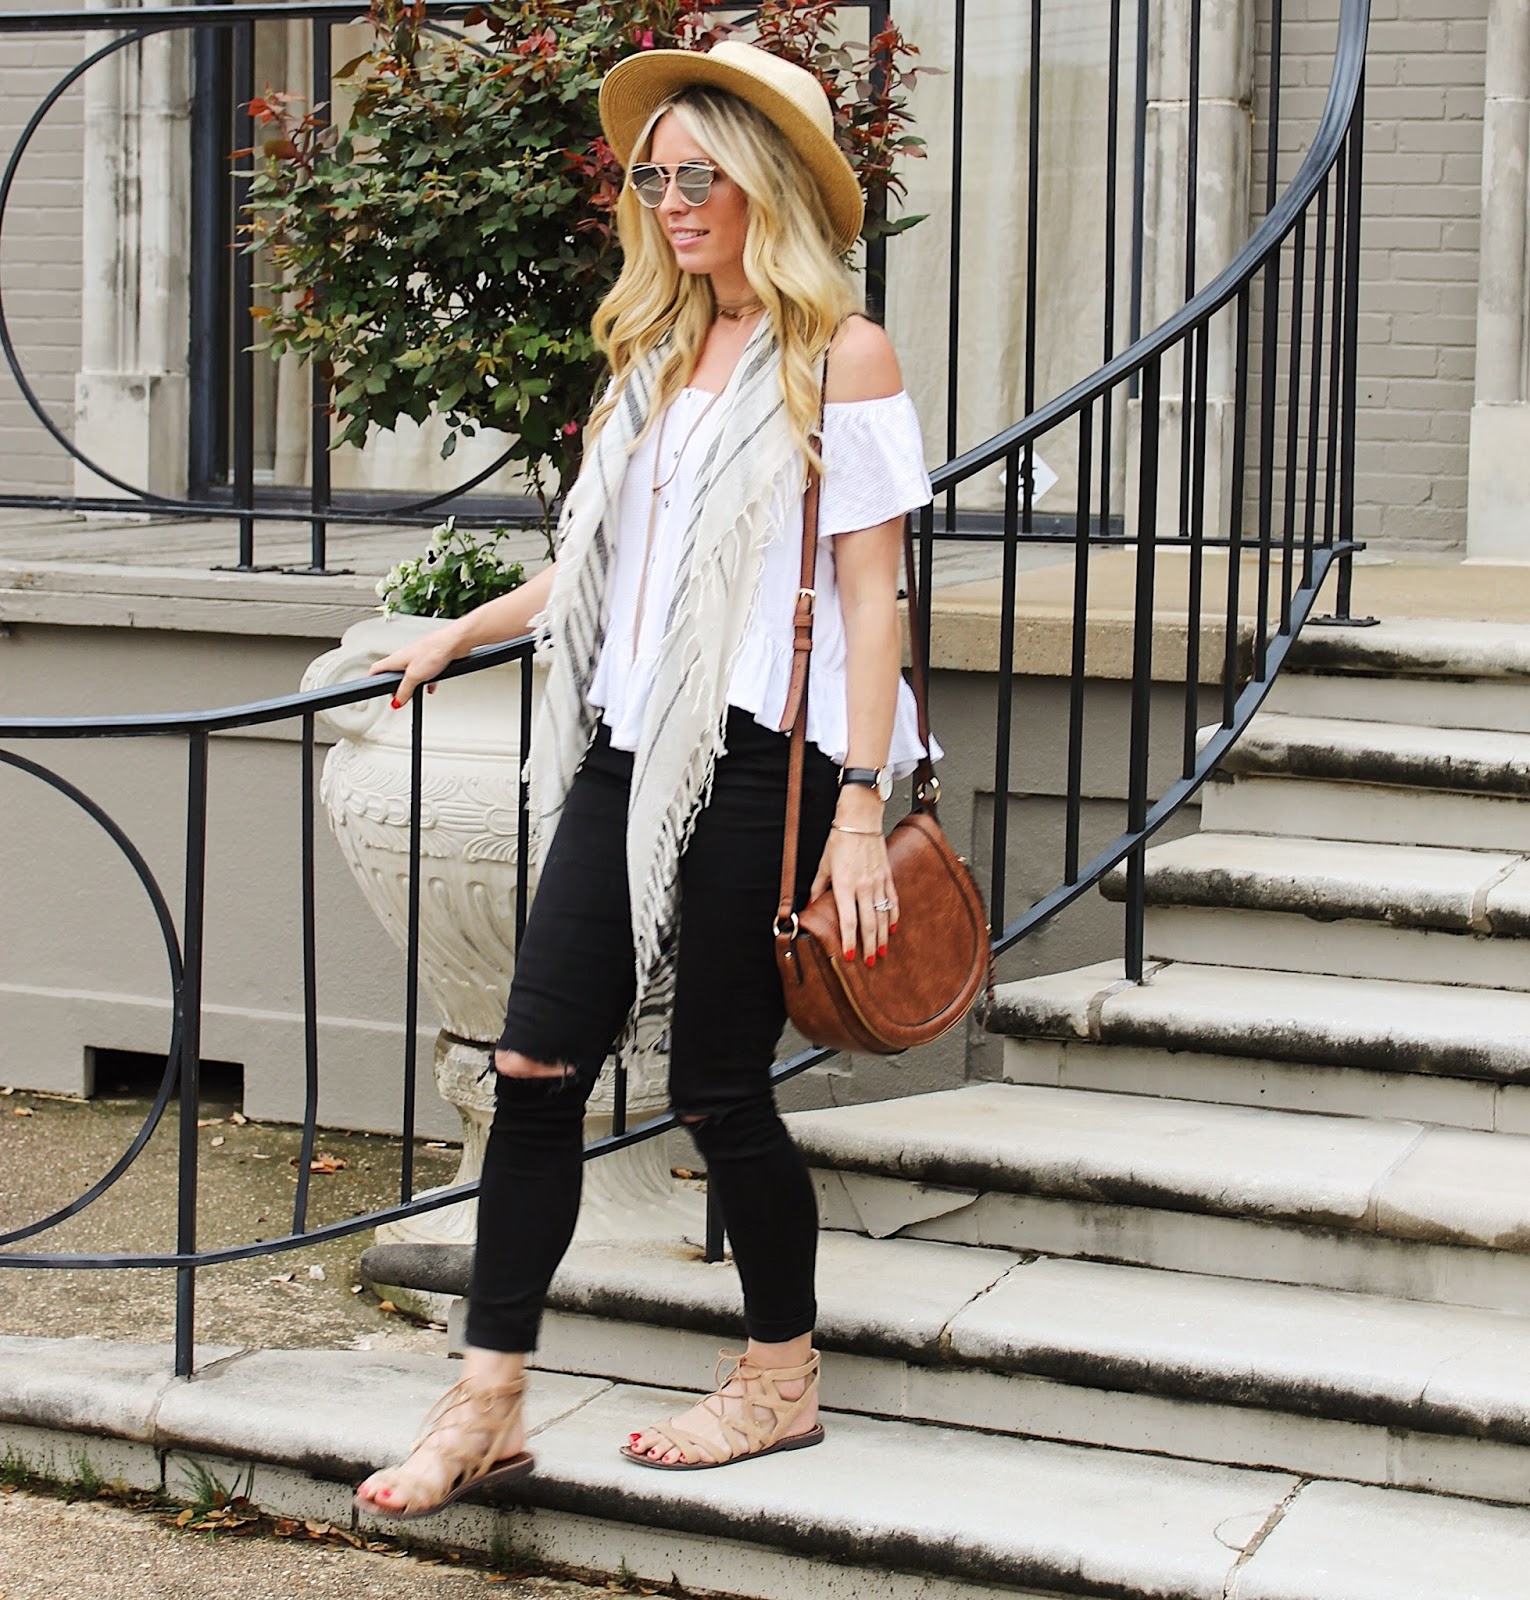 The Sue Style File: Sunday Funday Look